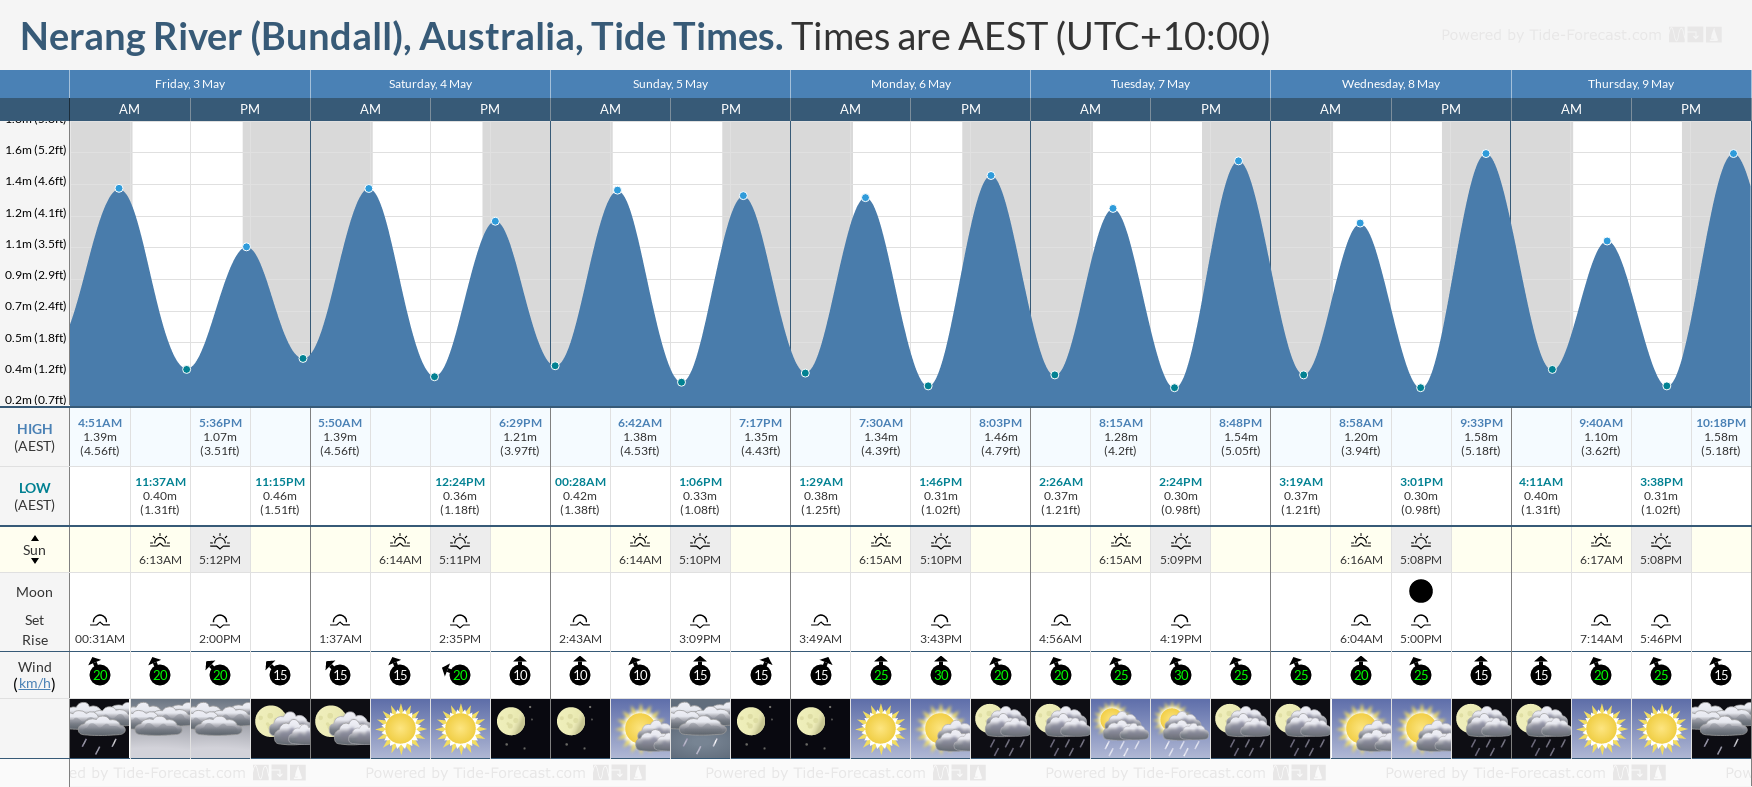 Nerang River (Bundall), Australia Tide Chart including high and low tide tide times for the next 7 days